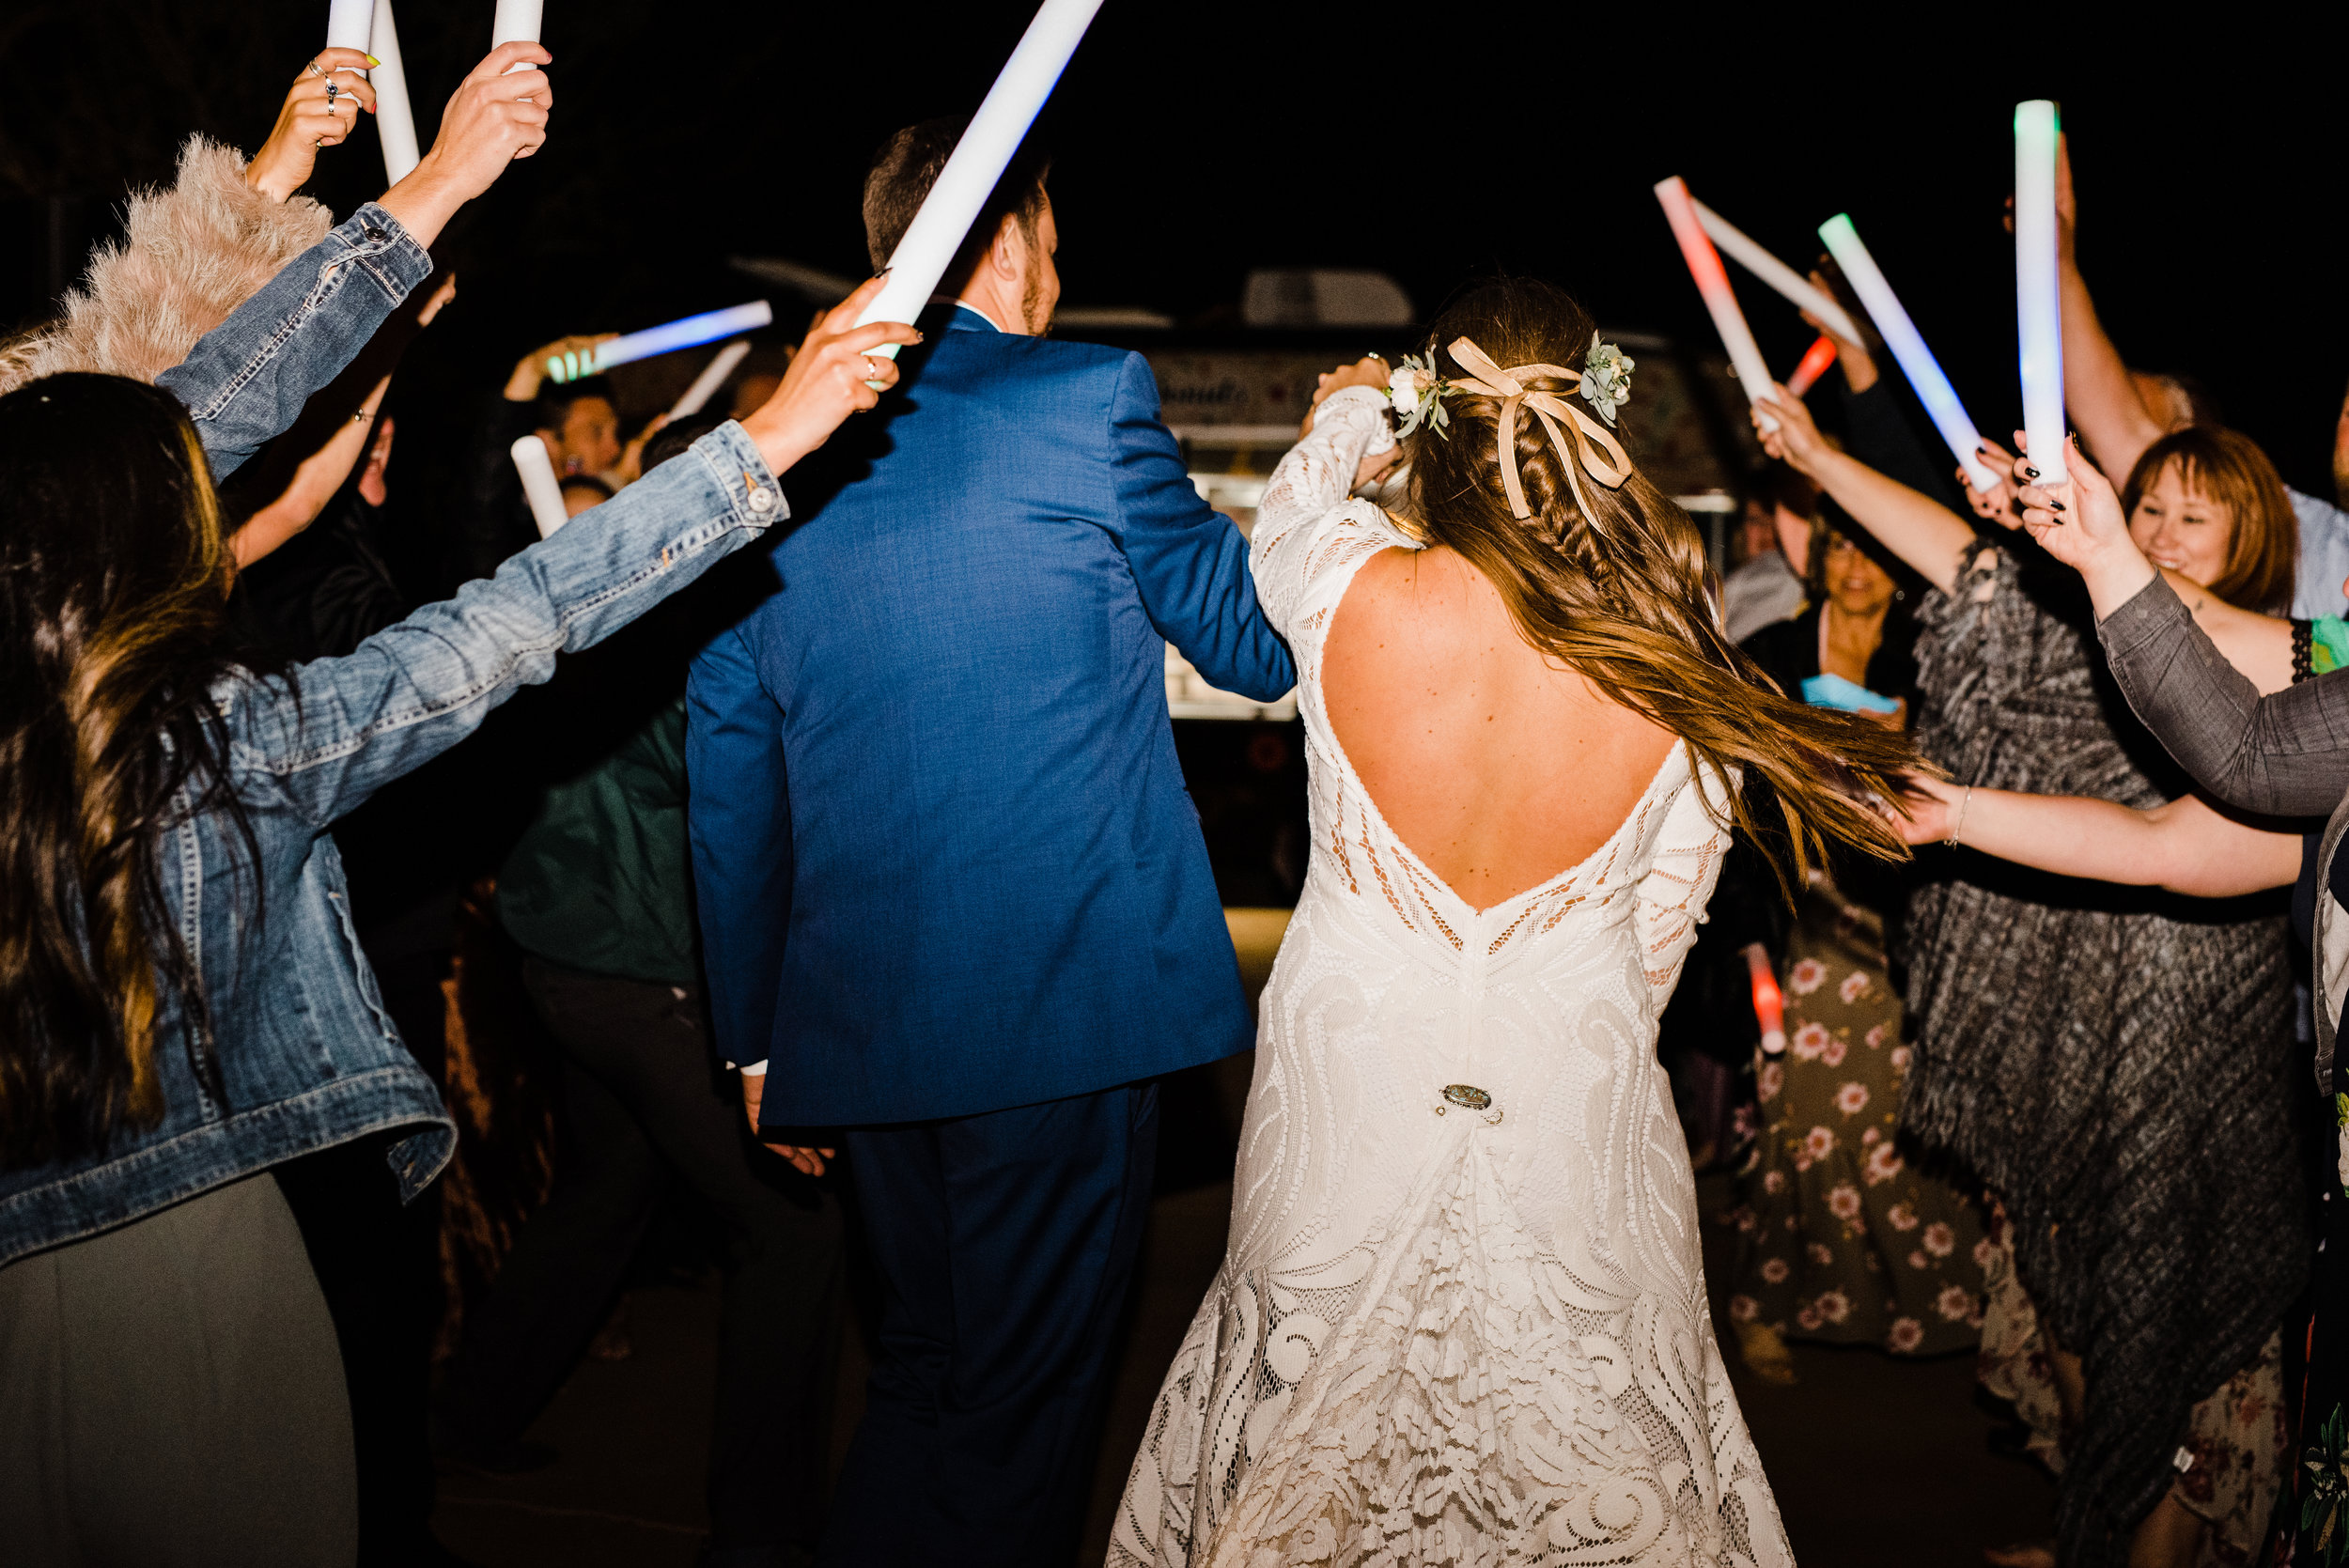 grand finale wedding exit with glow sticks at tumbleweed sanctuary